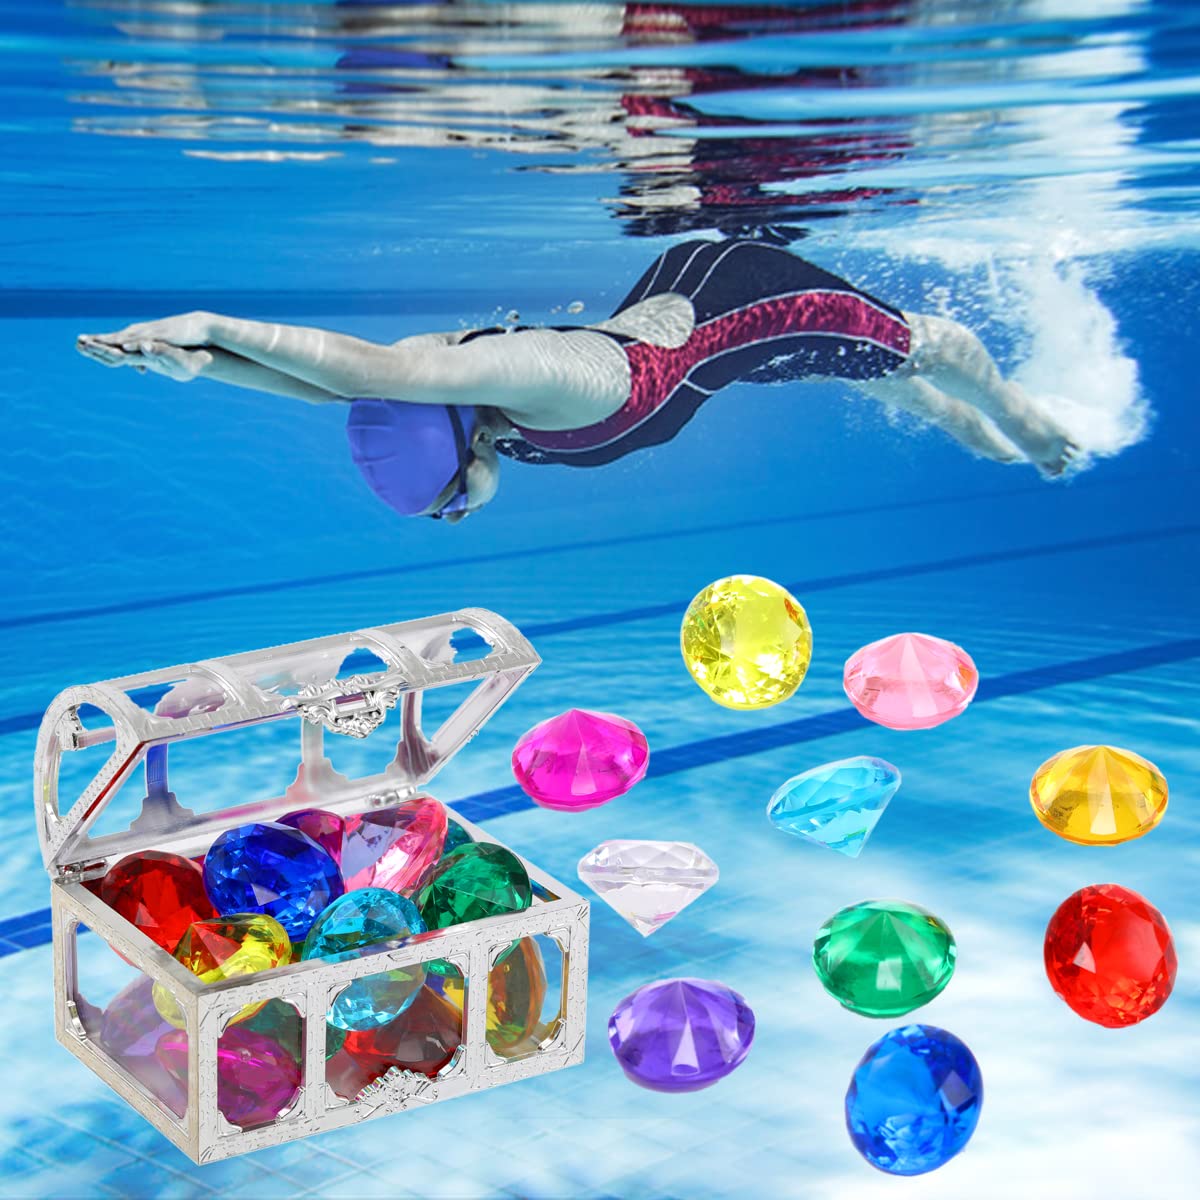 XIJUAN Diving gem Pool Toys Sand Toys,14Colorful Diamond Treasure Chest Summer Swimming gems Pirate Diving Toy Set Underwater Swimming toyChildren's Game Gifts for Boys and Girls(Silver White)